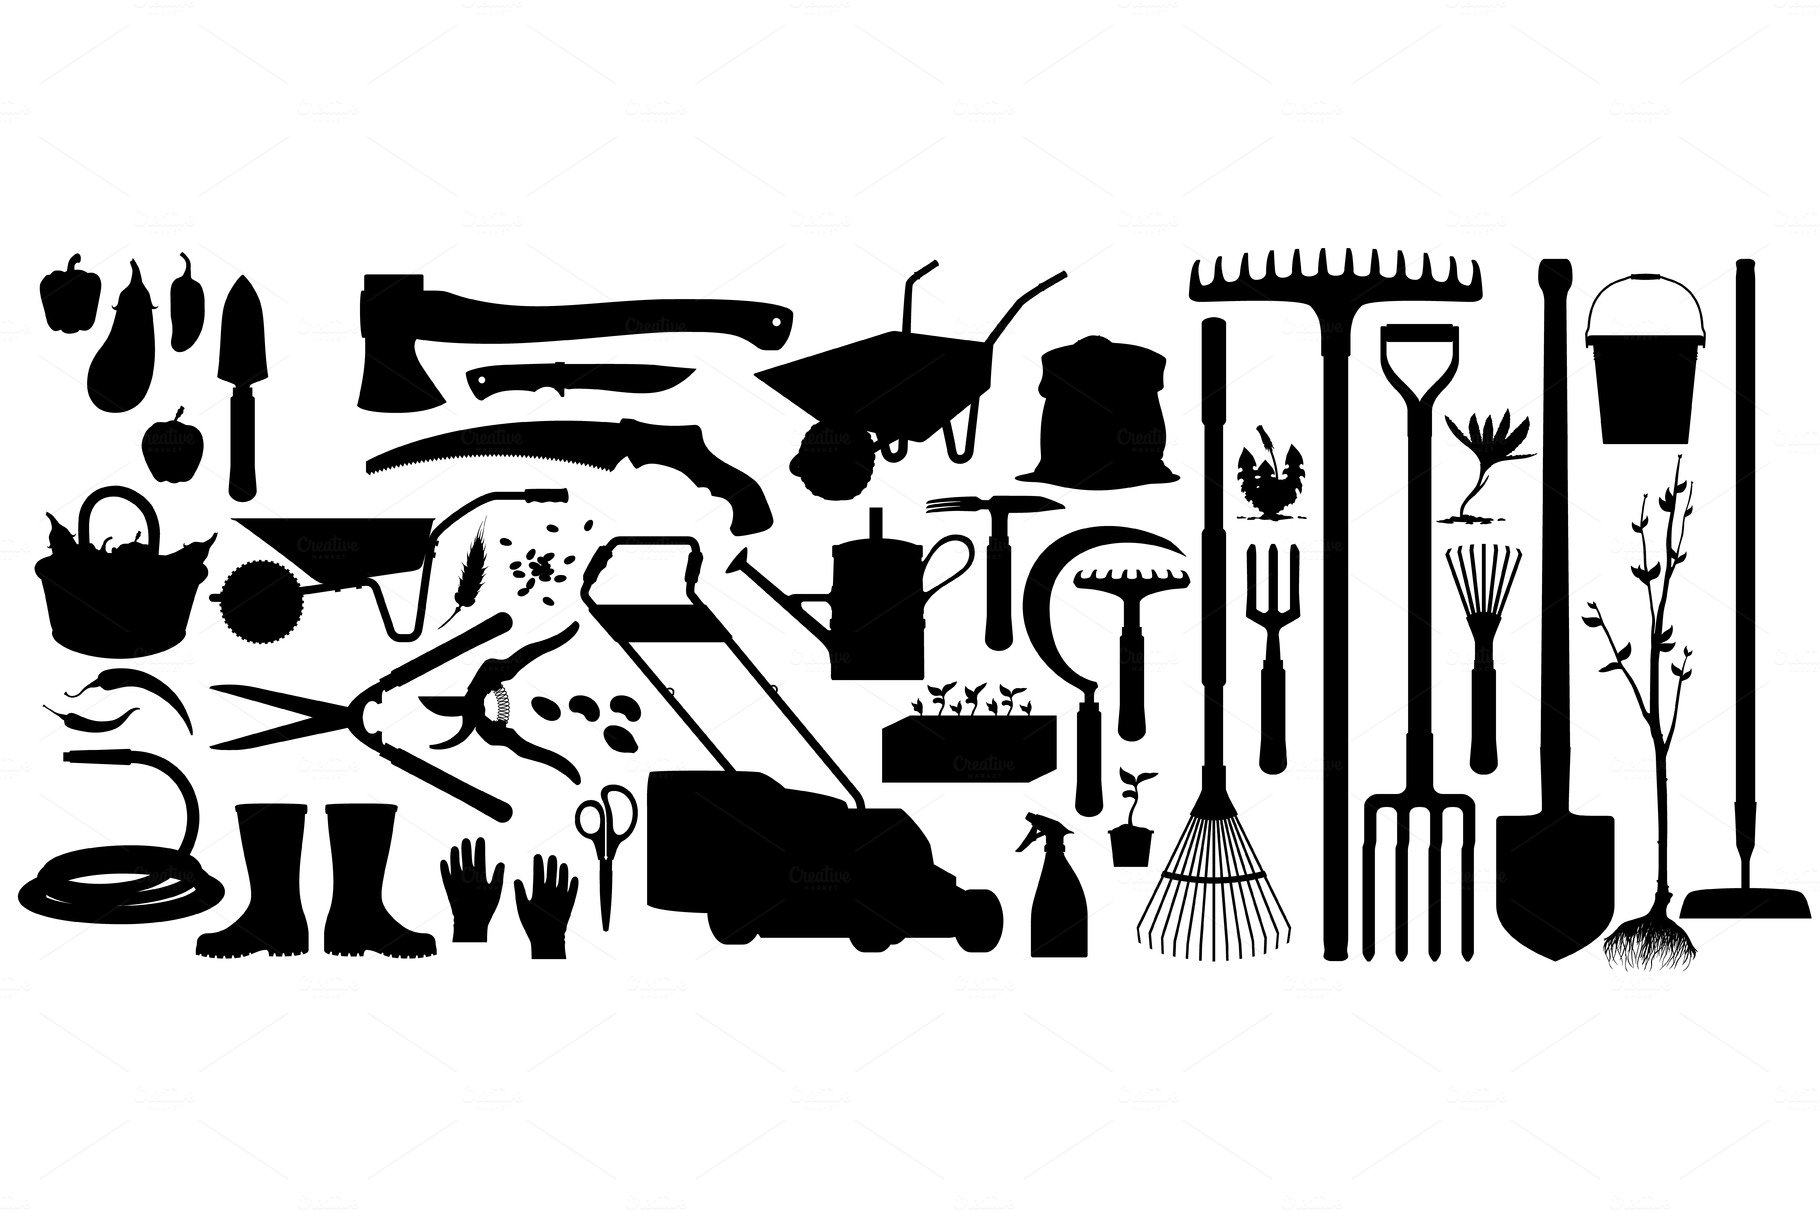 Gardening tools black silhouettes cover image.